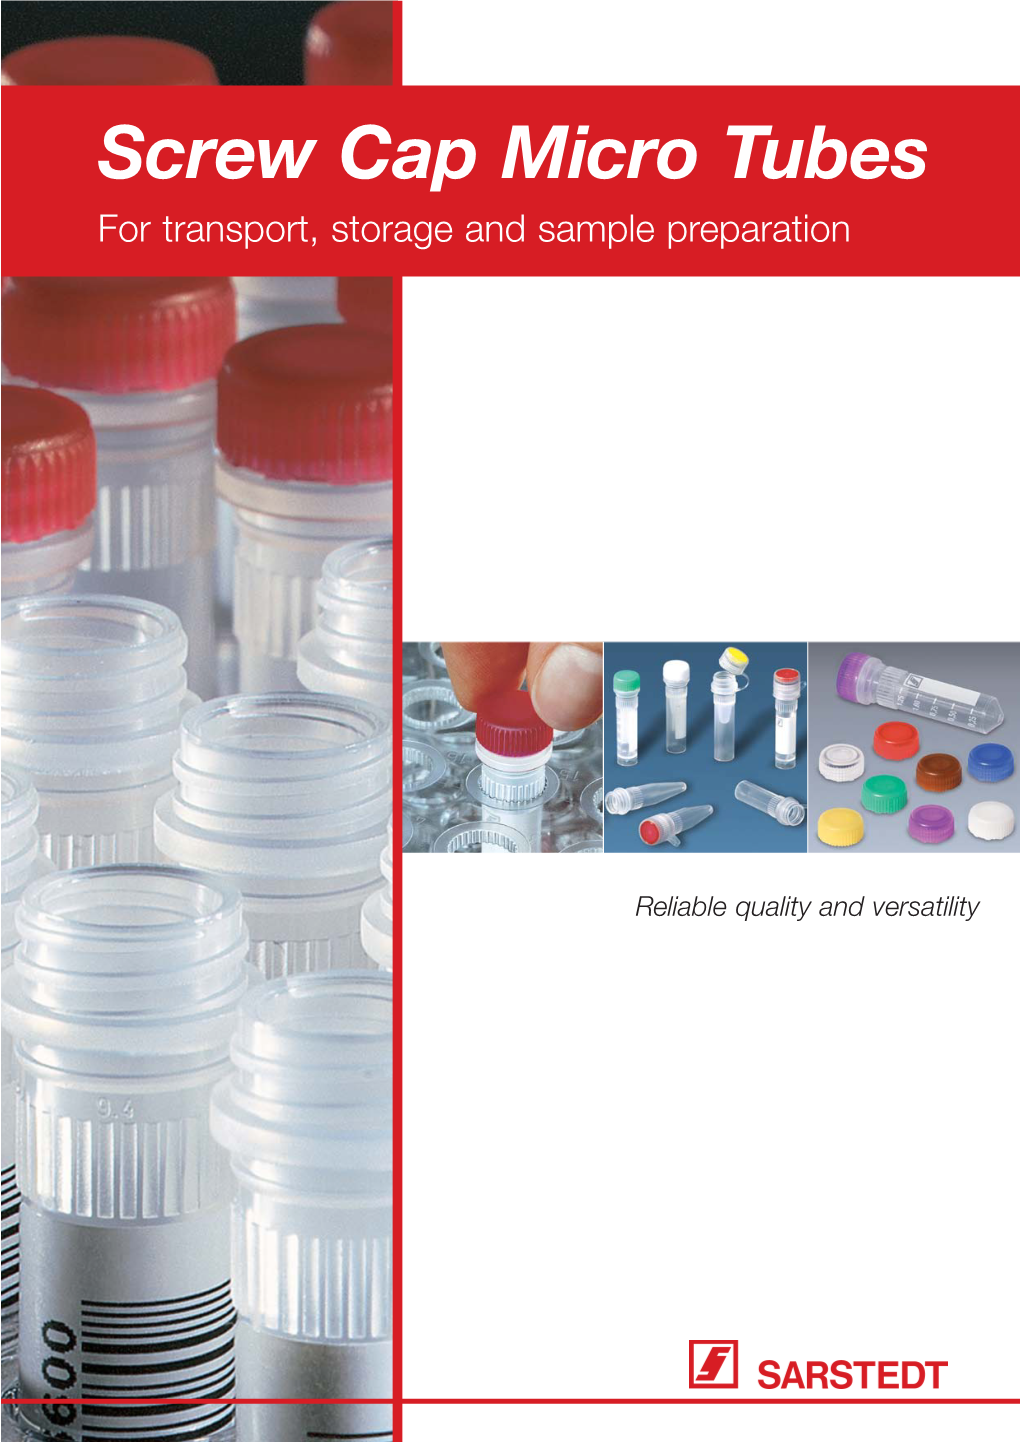 Screw Cap Micro Tubes for Transport, Storage and Sample Preparation